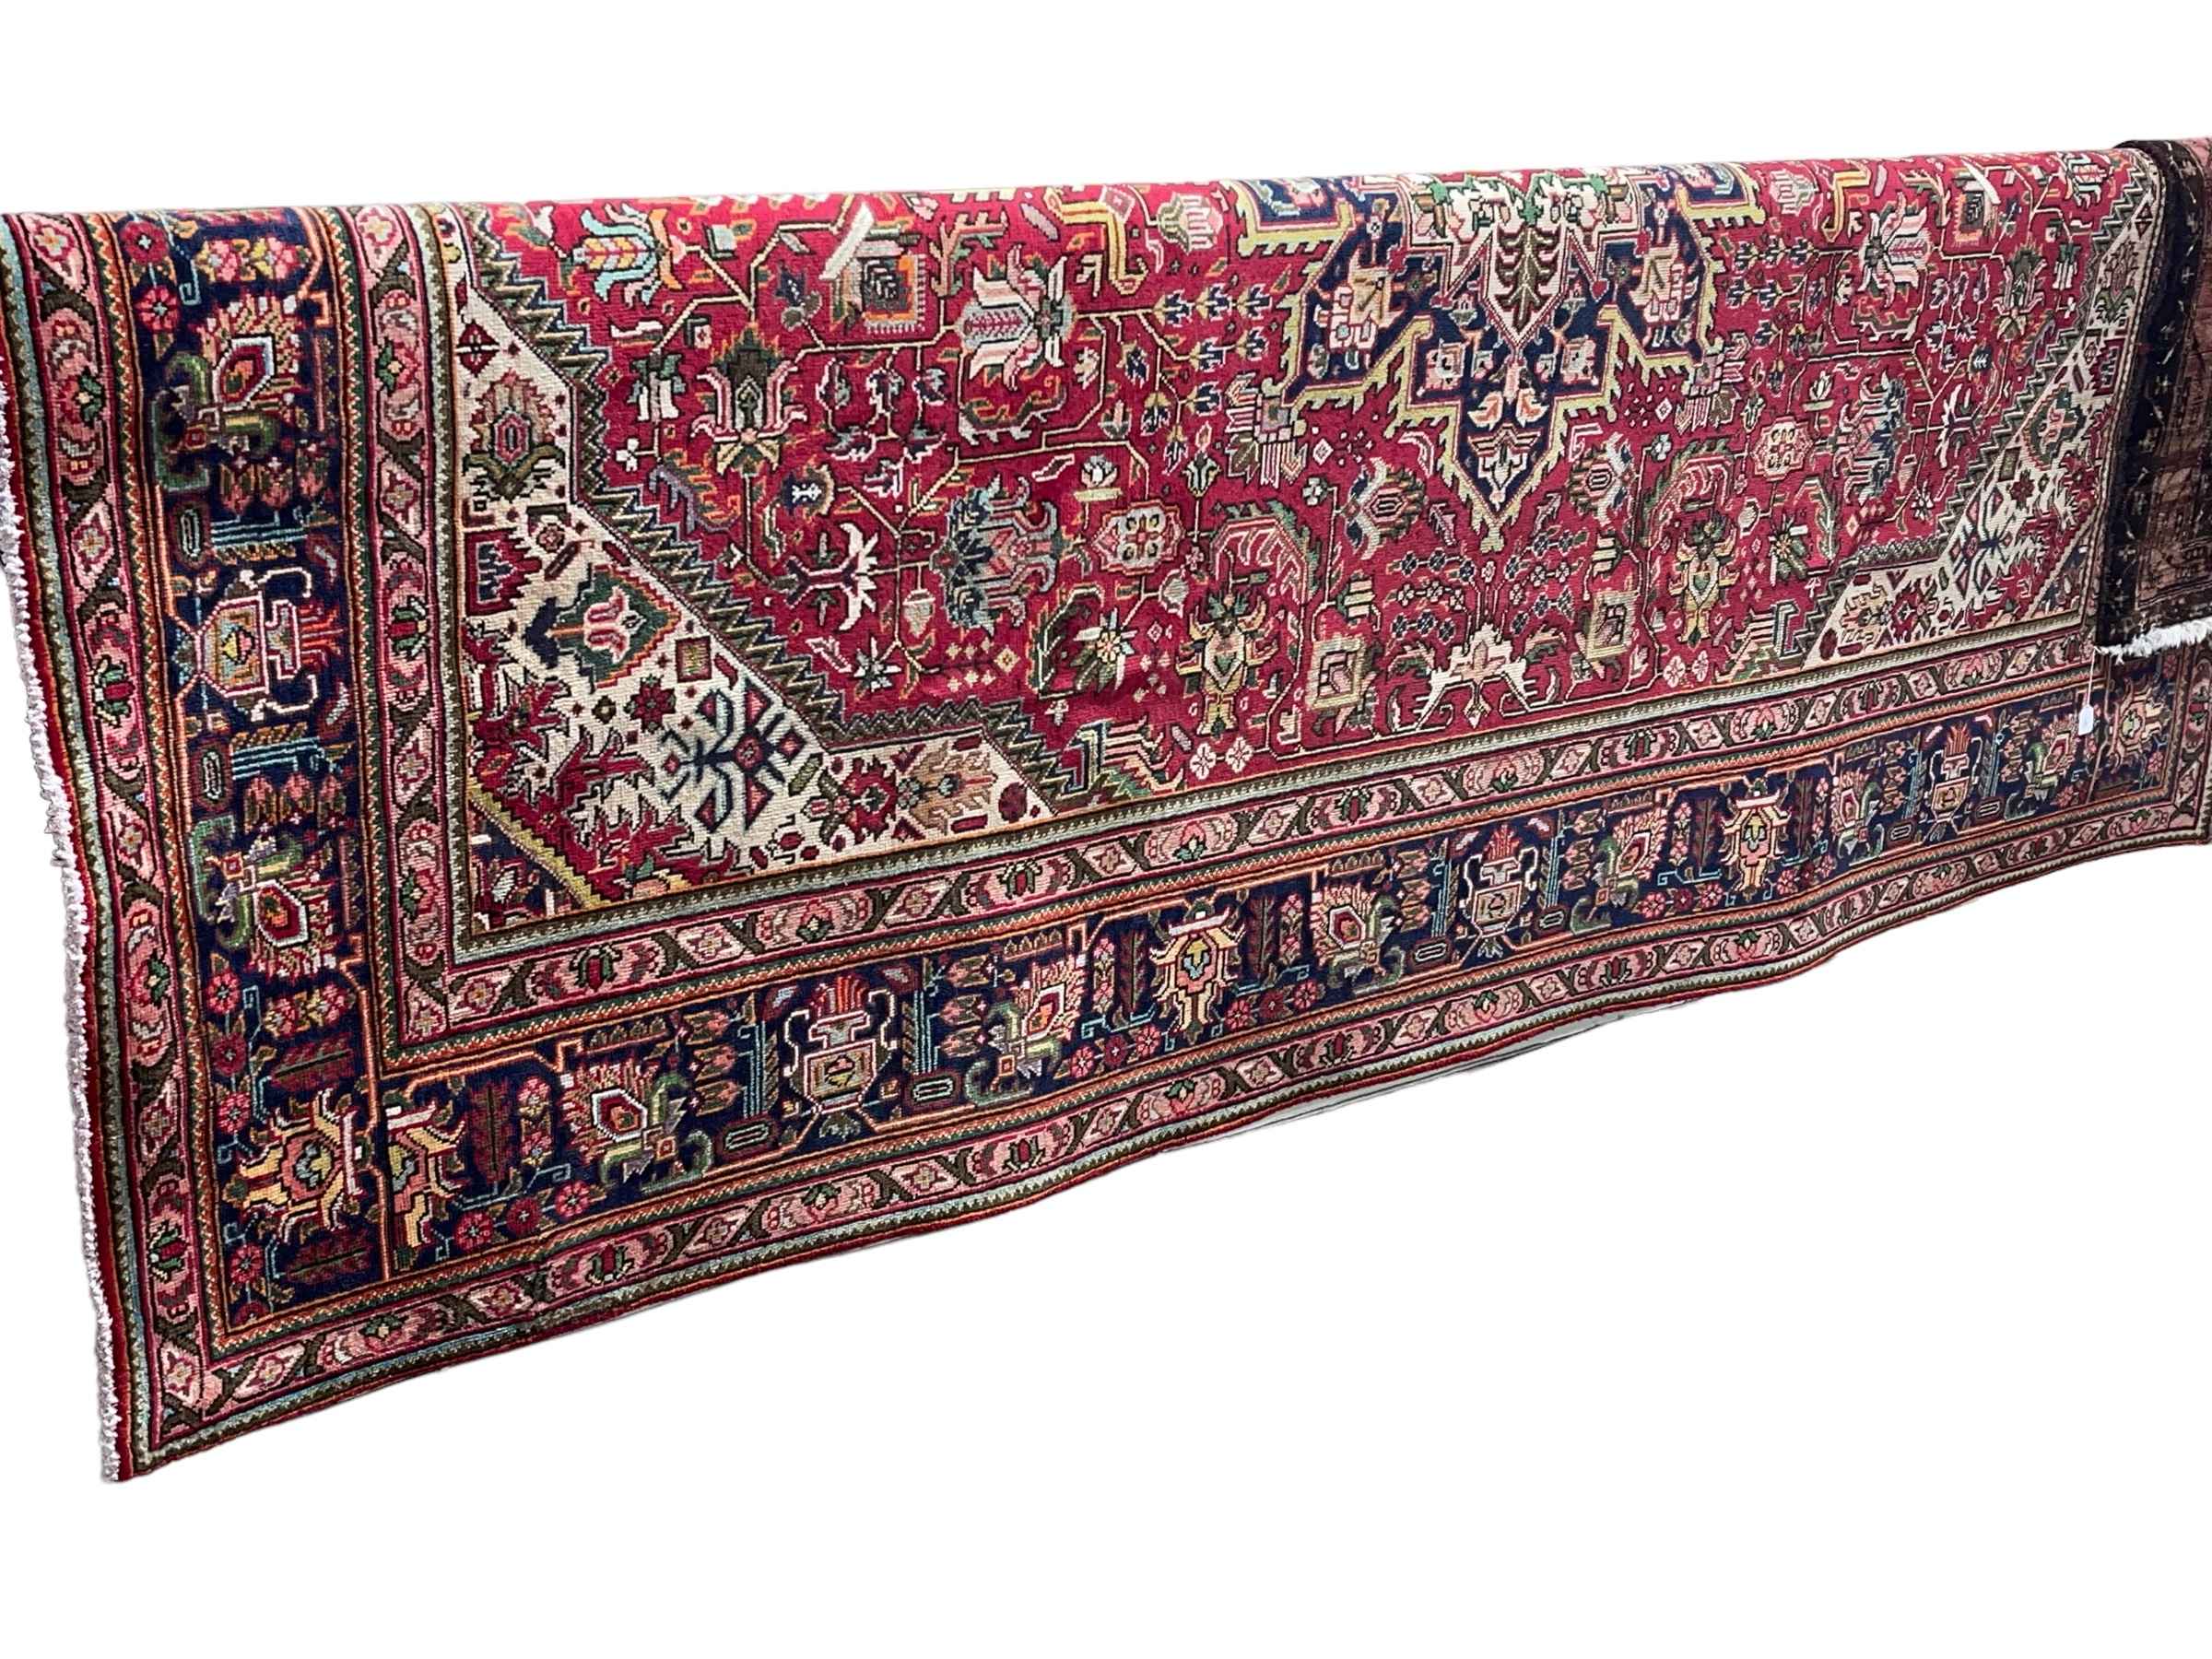 Fine 20th Century hand knotted Iranian Tabriz carpet 3.46 by 2.52.